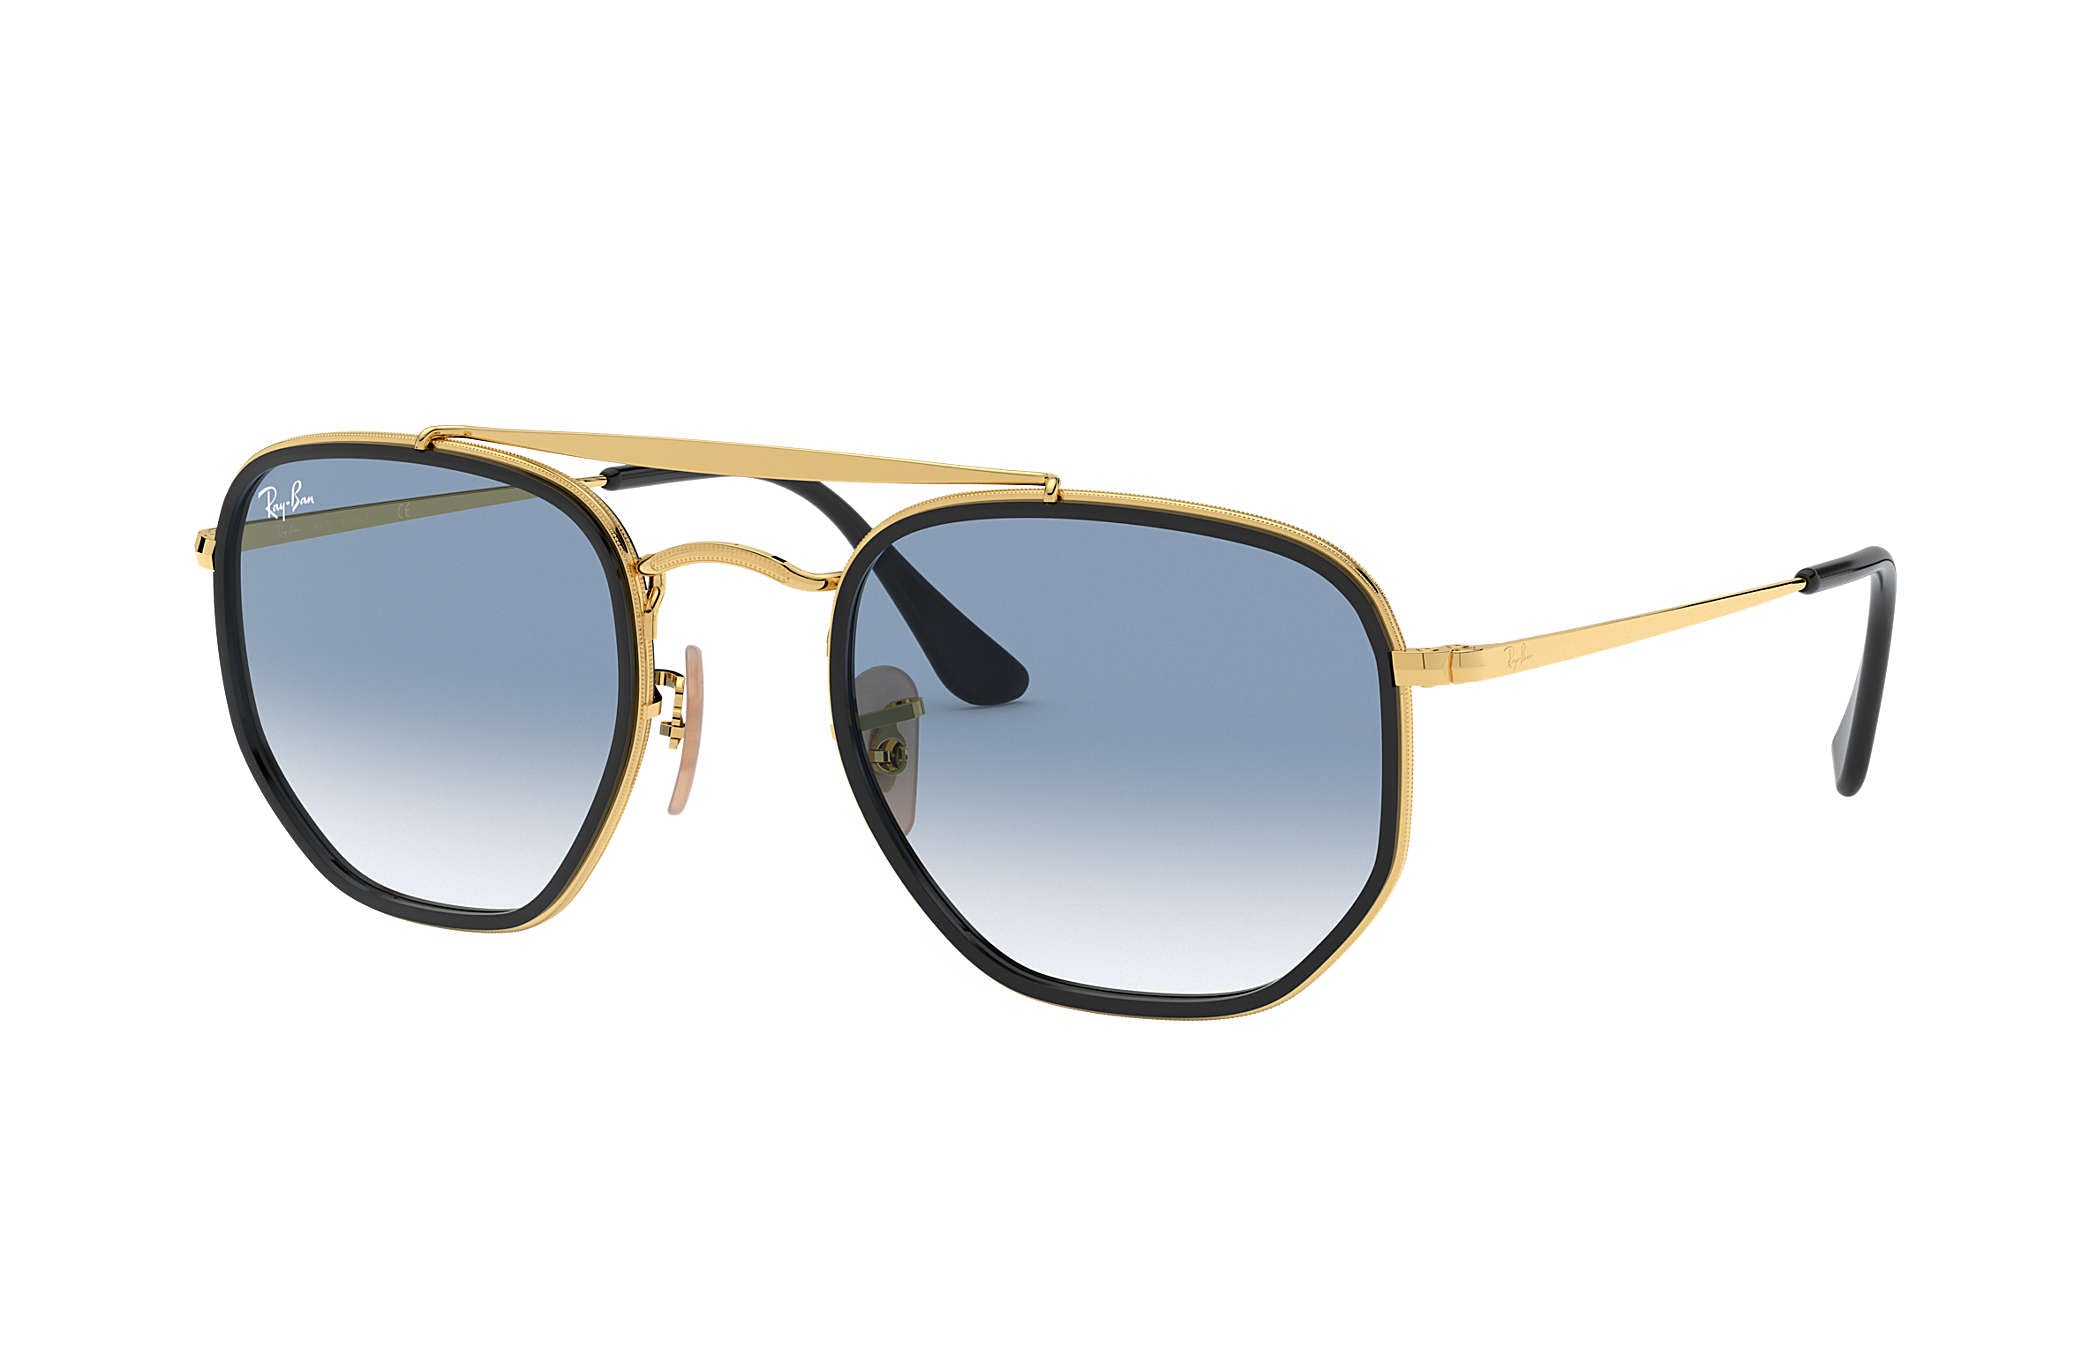 Ray Ban The Marshall II Sunglasses Gold ClearGradient Aviator